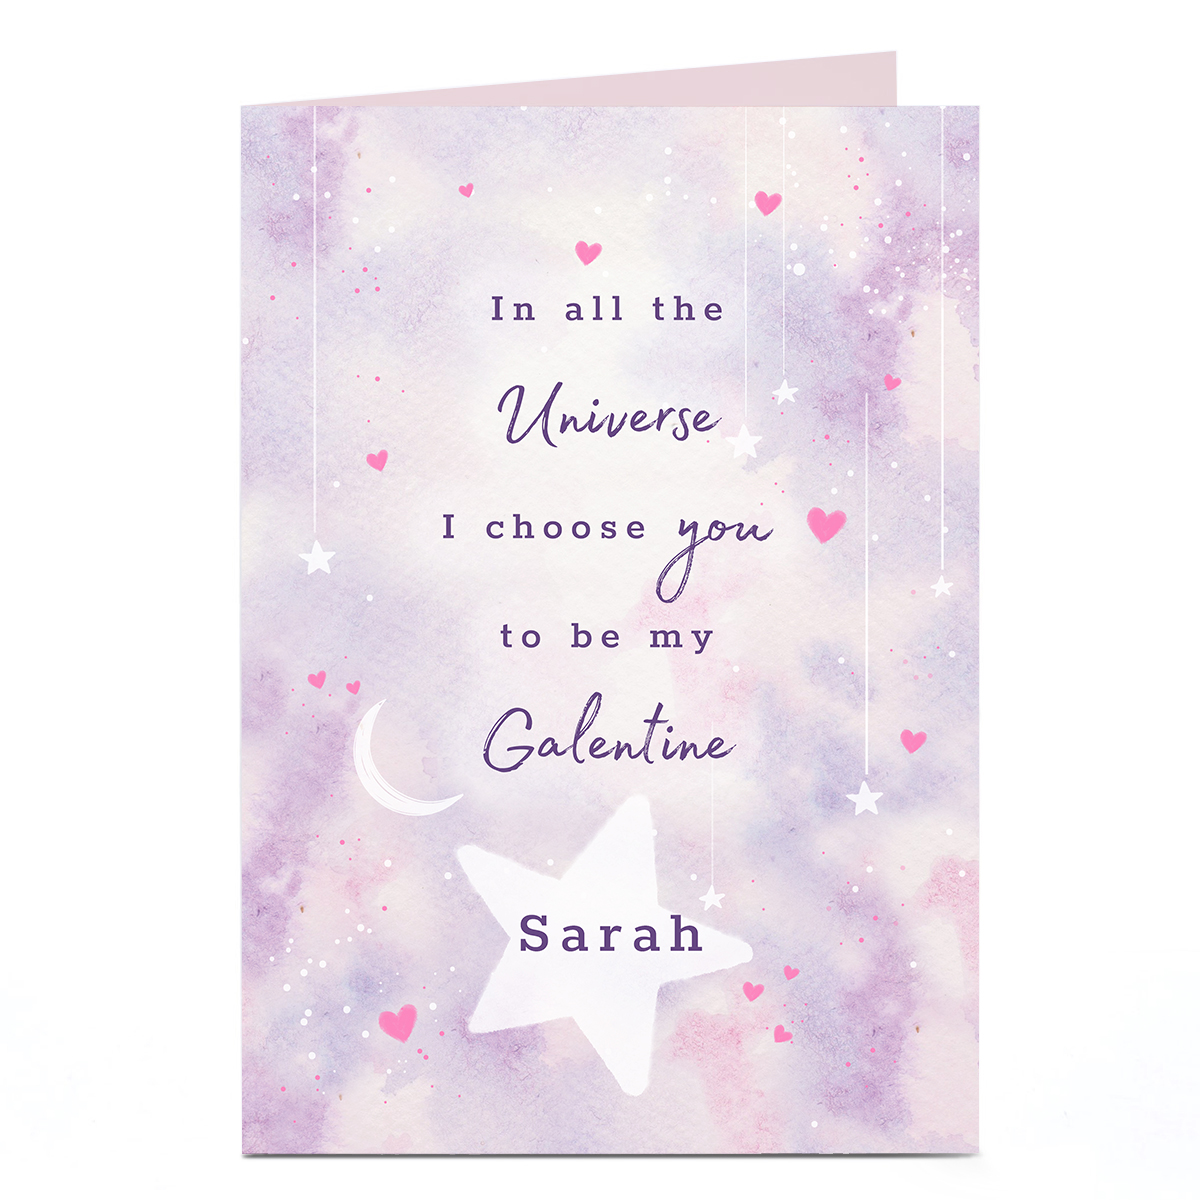 Personalised Valentine's Day Card - To Be My Galentine